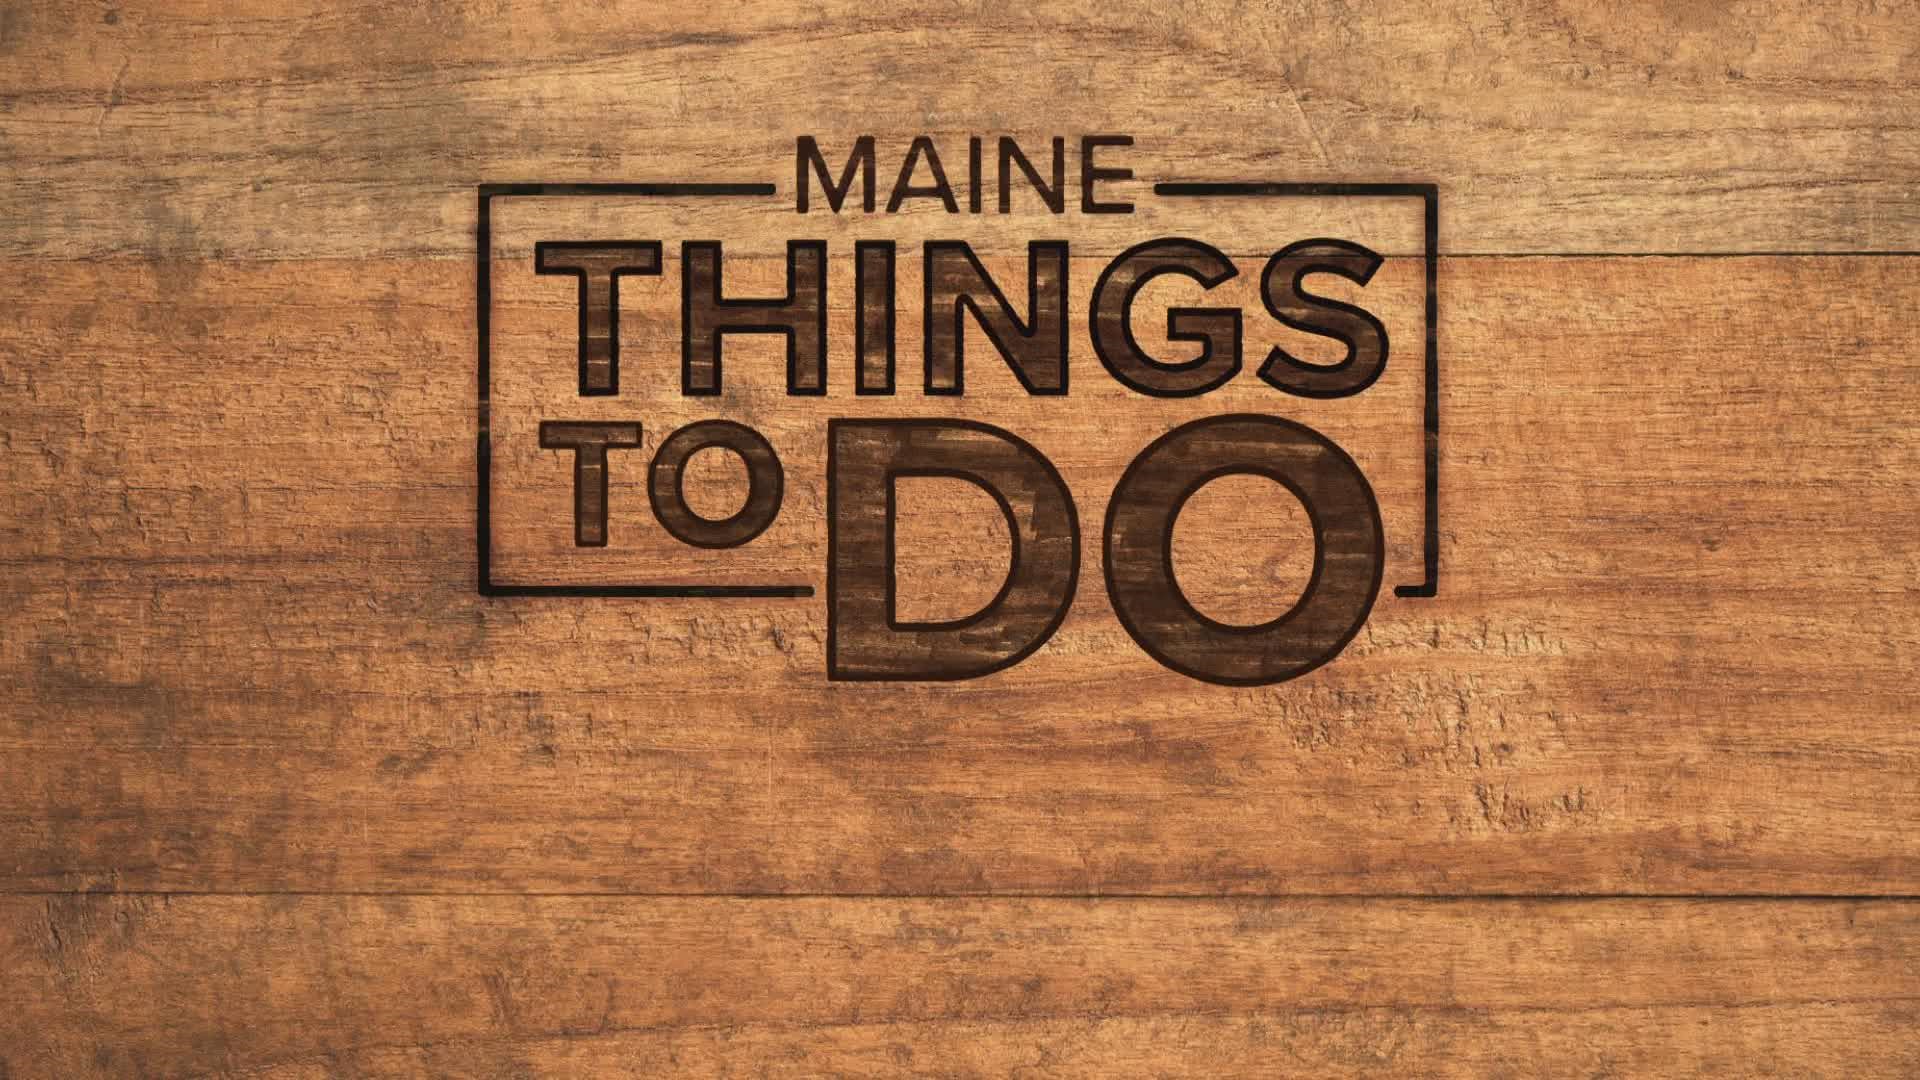 Maine Things To Do | July 5 - July 11